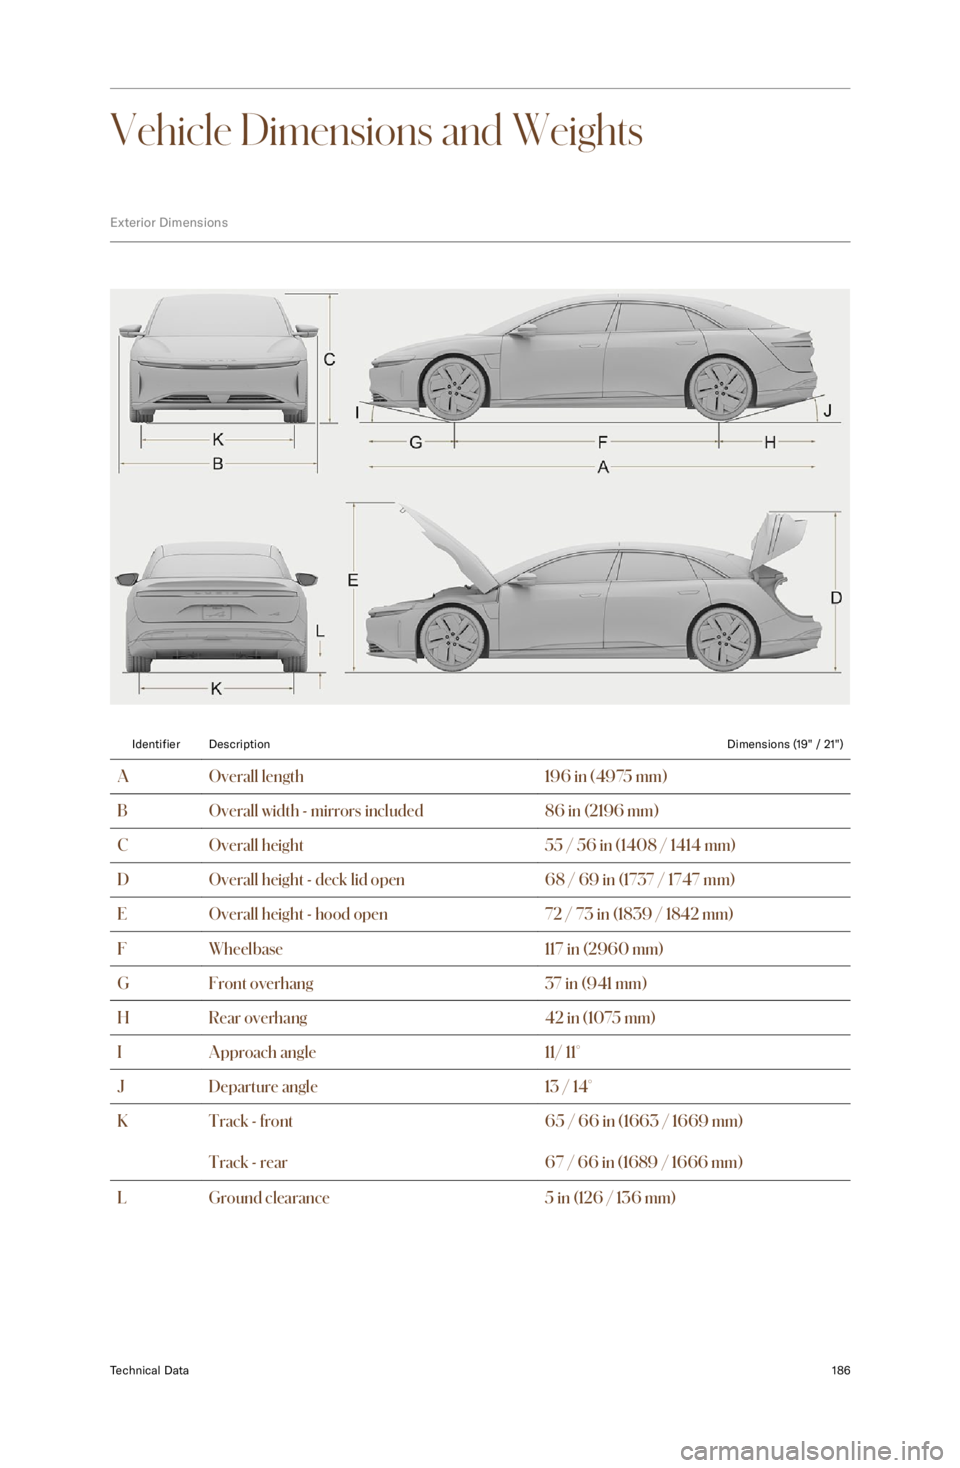 LUCID AIR 2023  Owners Manual Vehicle Dimensions and Weights
Exterior DimensionsIdentifierDescriptionDimensions (19" / 21")AOverall length196 in (4975 mm)BOverall width - mirrors included86 in (2196 mm)COverall height55 / 56 in (1